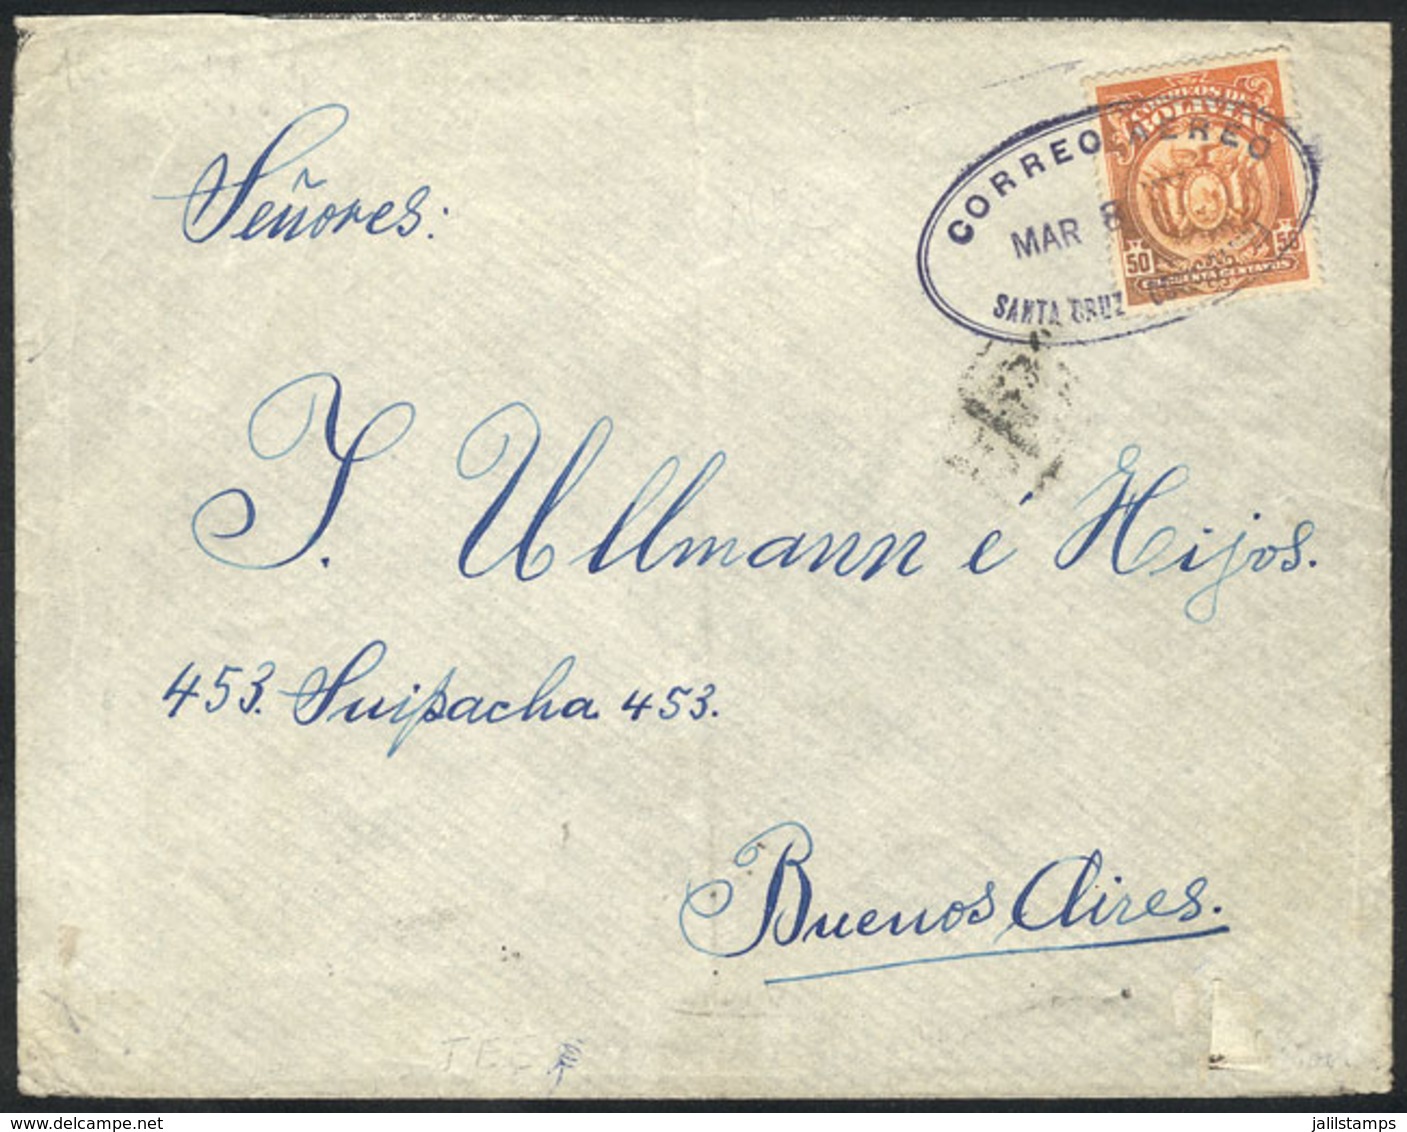 625 BOLIVIA: 8/MAR/1927 Cover Franked With 50c. And Flown Between Santa Cruz And Coc - Bolivie